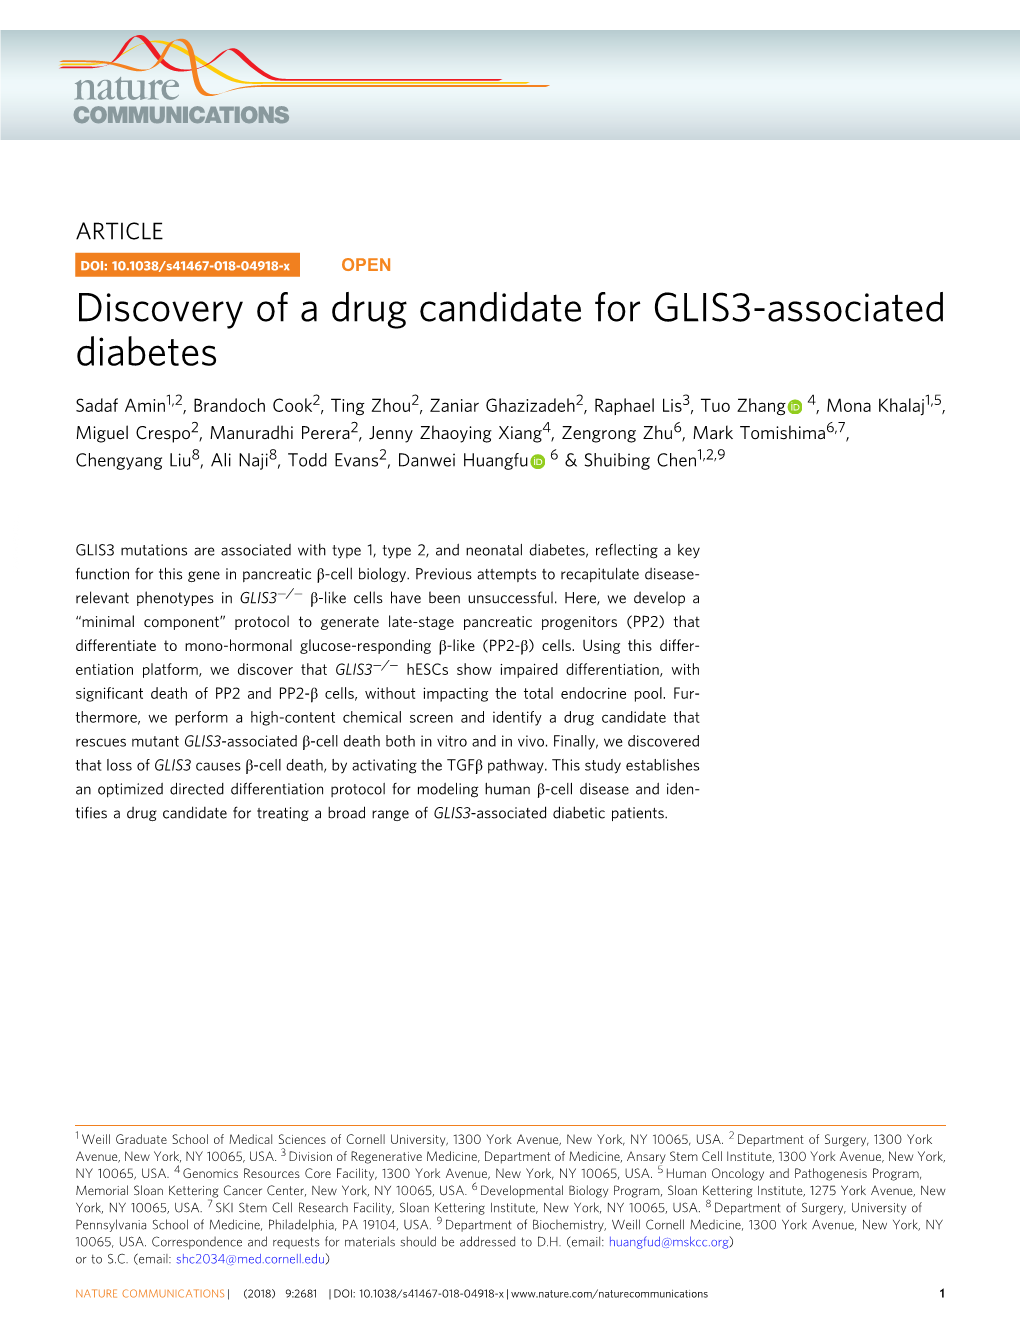 Discovery of a Drug Candidate for GLIS3-Associated Diabetes